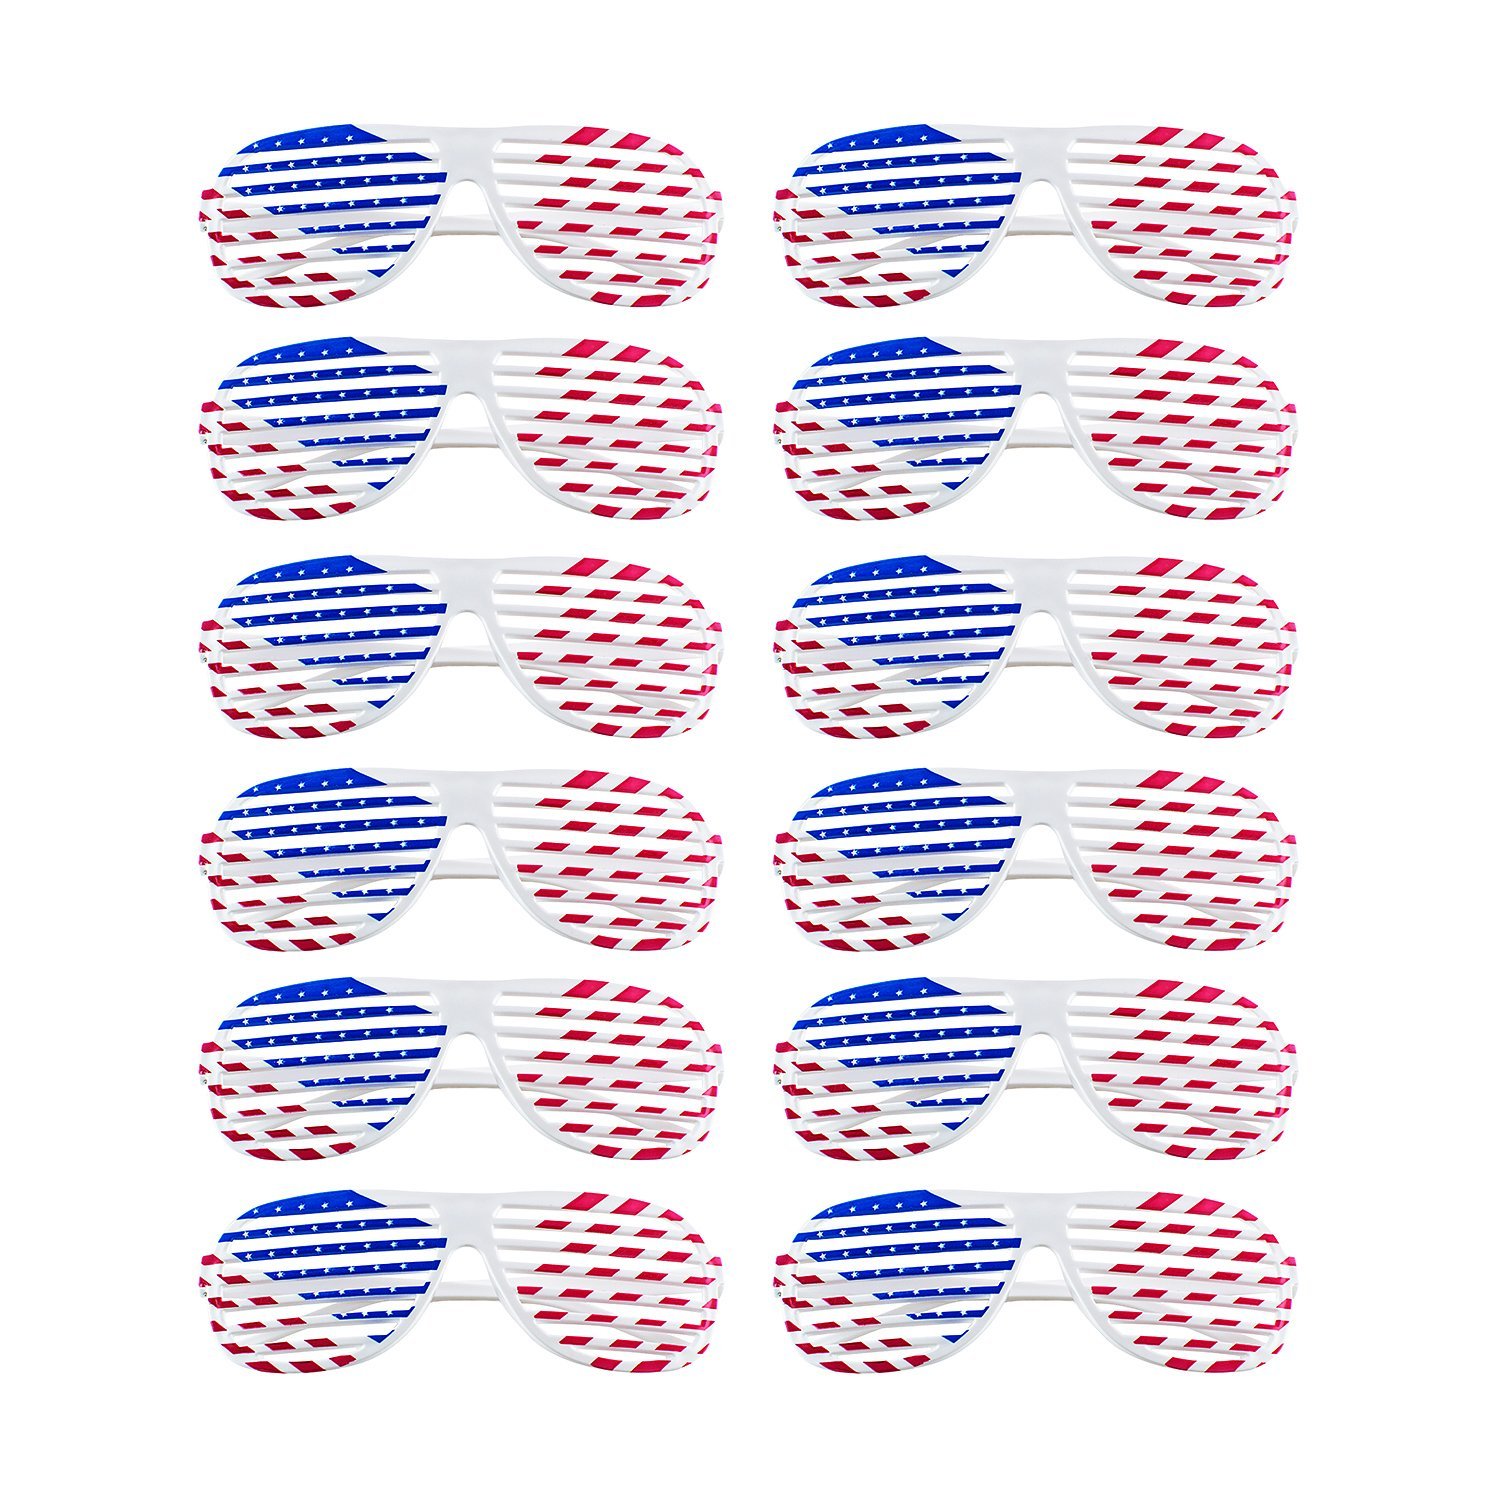 Protect your eyes from the sun while looking American AF!  Get it <a href="https://amzn.to/2IIGYJK" target="_blank"><font color="red"><b>HERE</font></b></a>